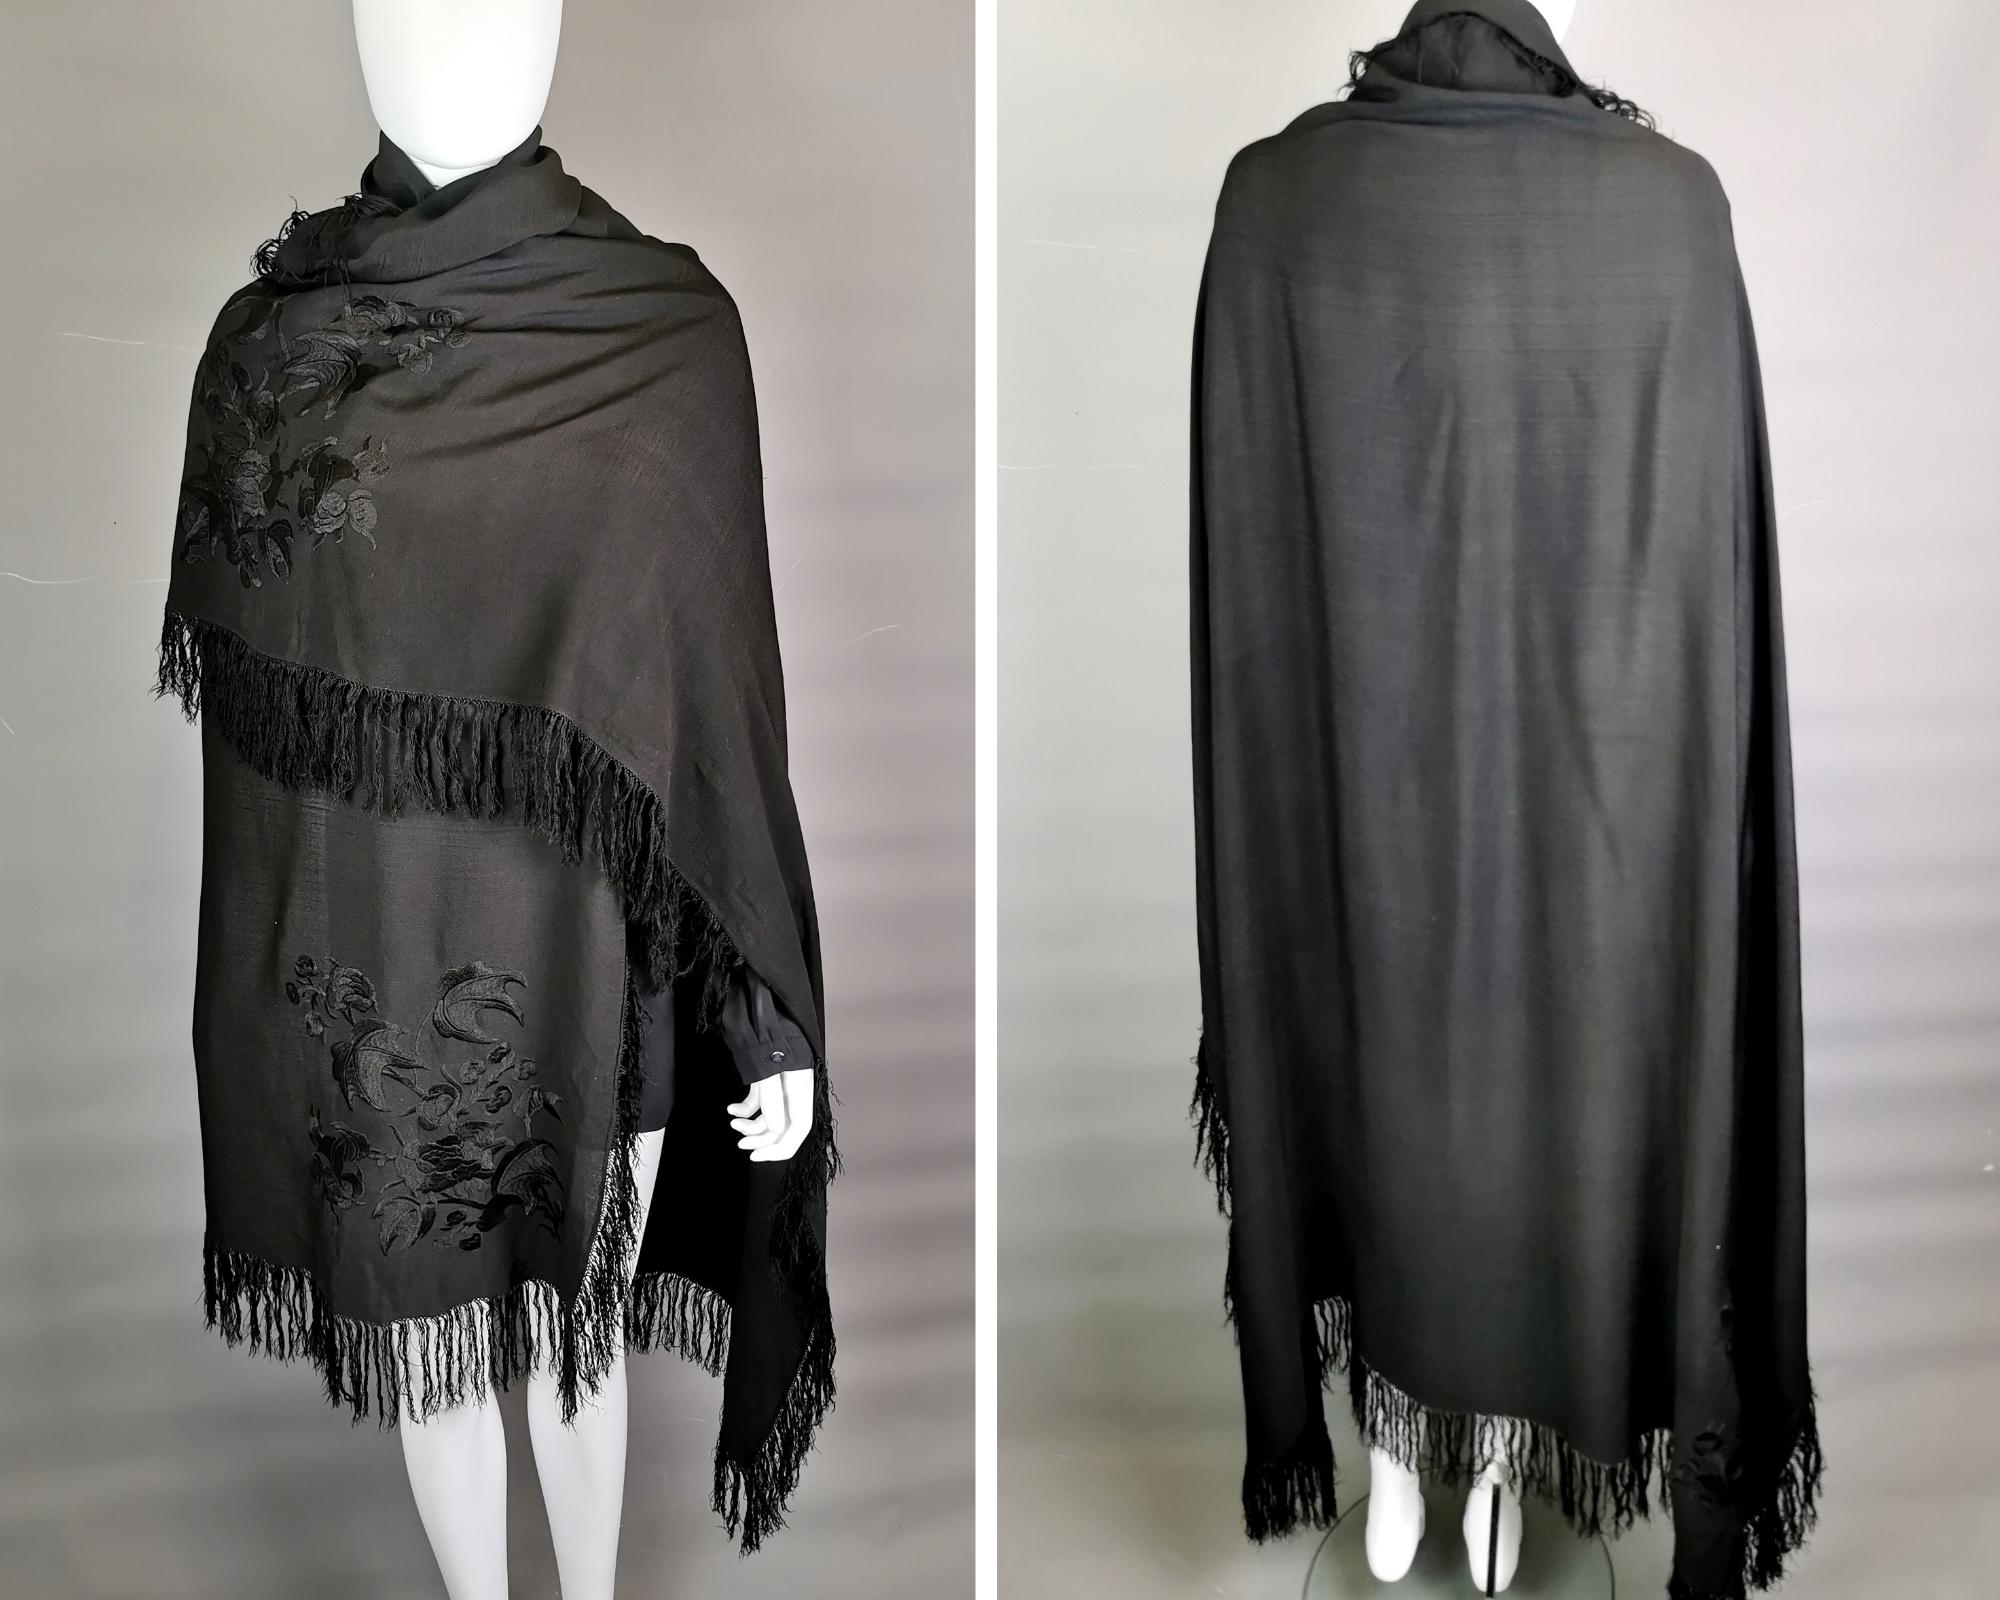 A gorgeous vintage, Art Deco era large crepe silk shawl.

It is a nice rich black colour with a small tassled fringe, the alternate corners have a large embroidered floral design.

It is a large size, very versatile and can be worn many